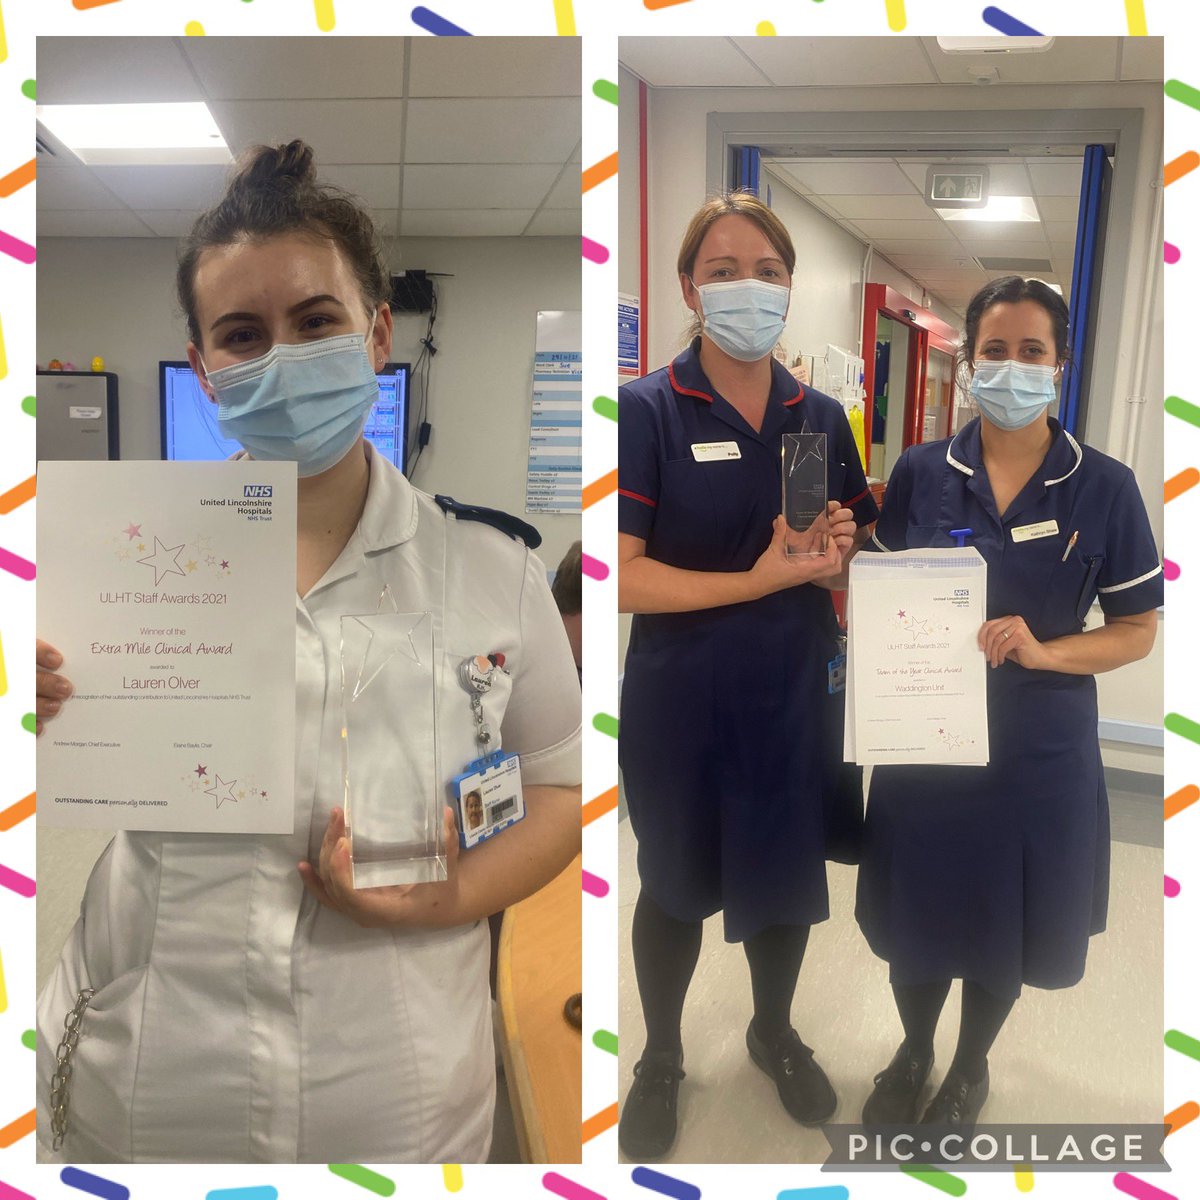 ….and here we have it!! Our staff awards have been delivered to our wonderful nurse Lauren and to Waddington Unit ❤️ so very well deserved 🥇